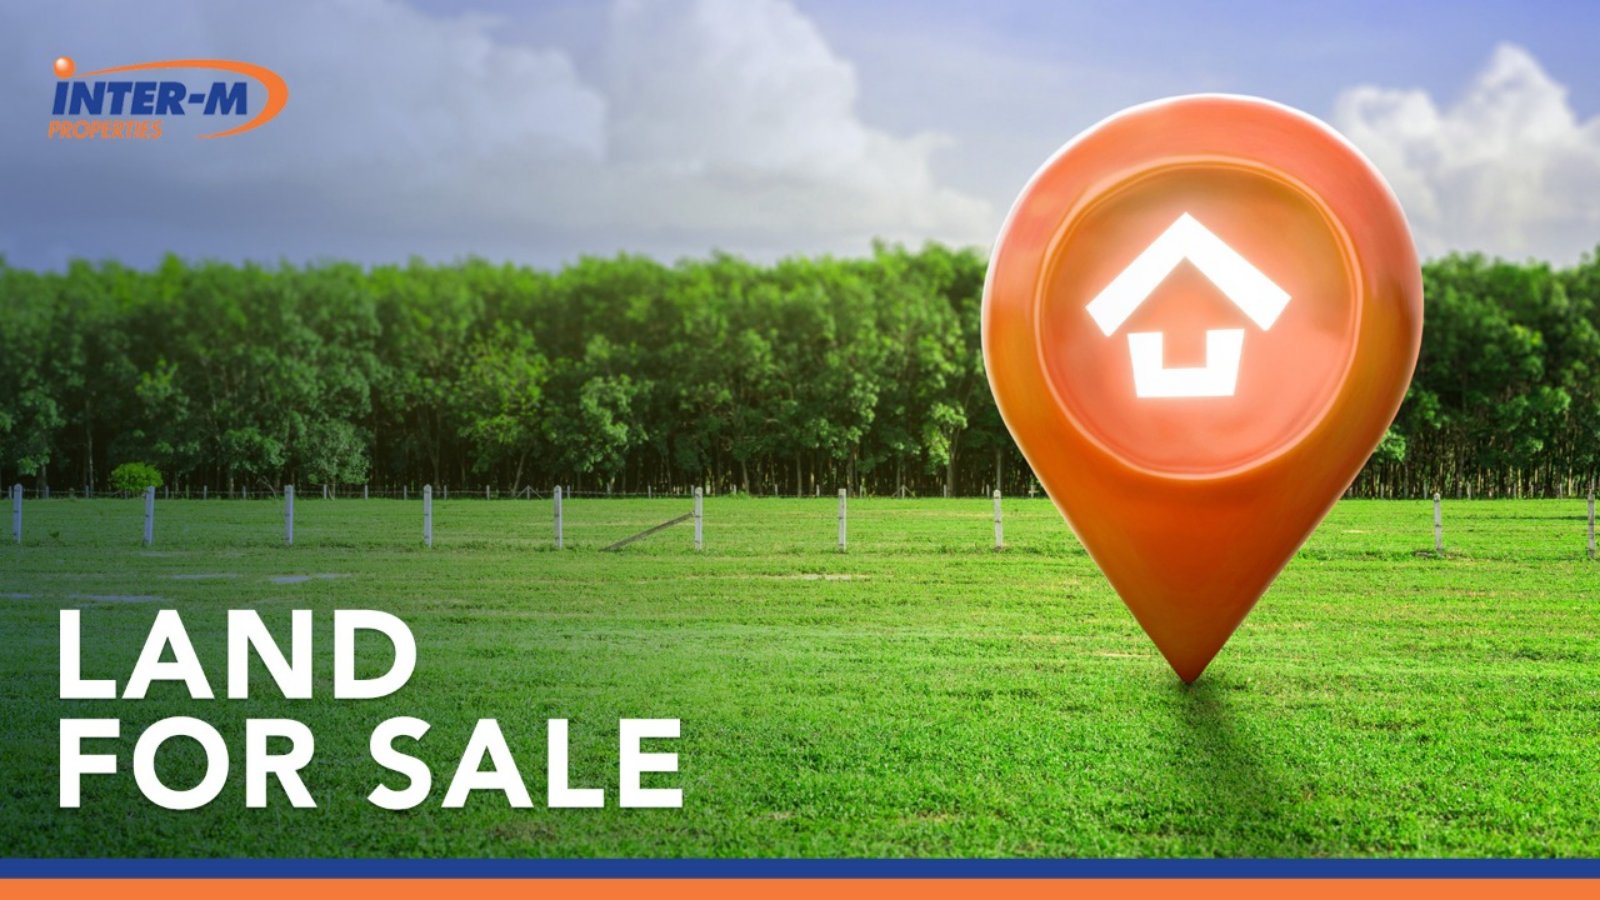 Land Residential For Sale In Eptagonia (4014 sq.m)